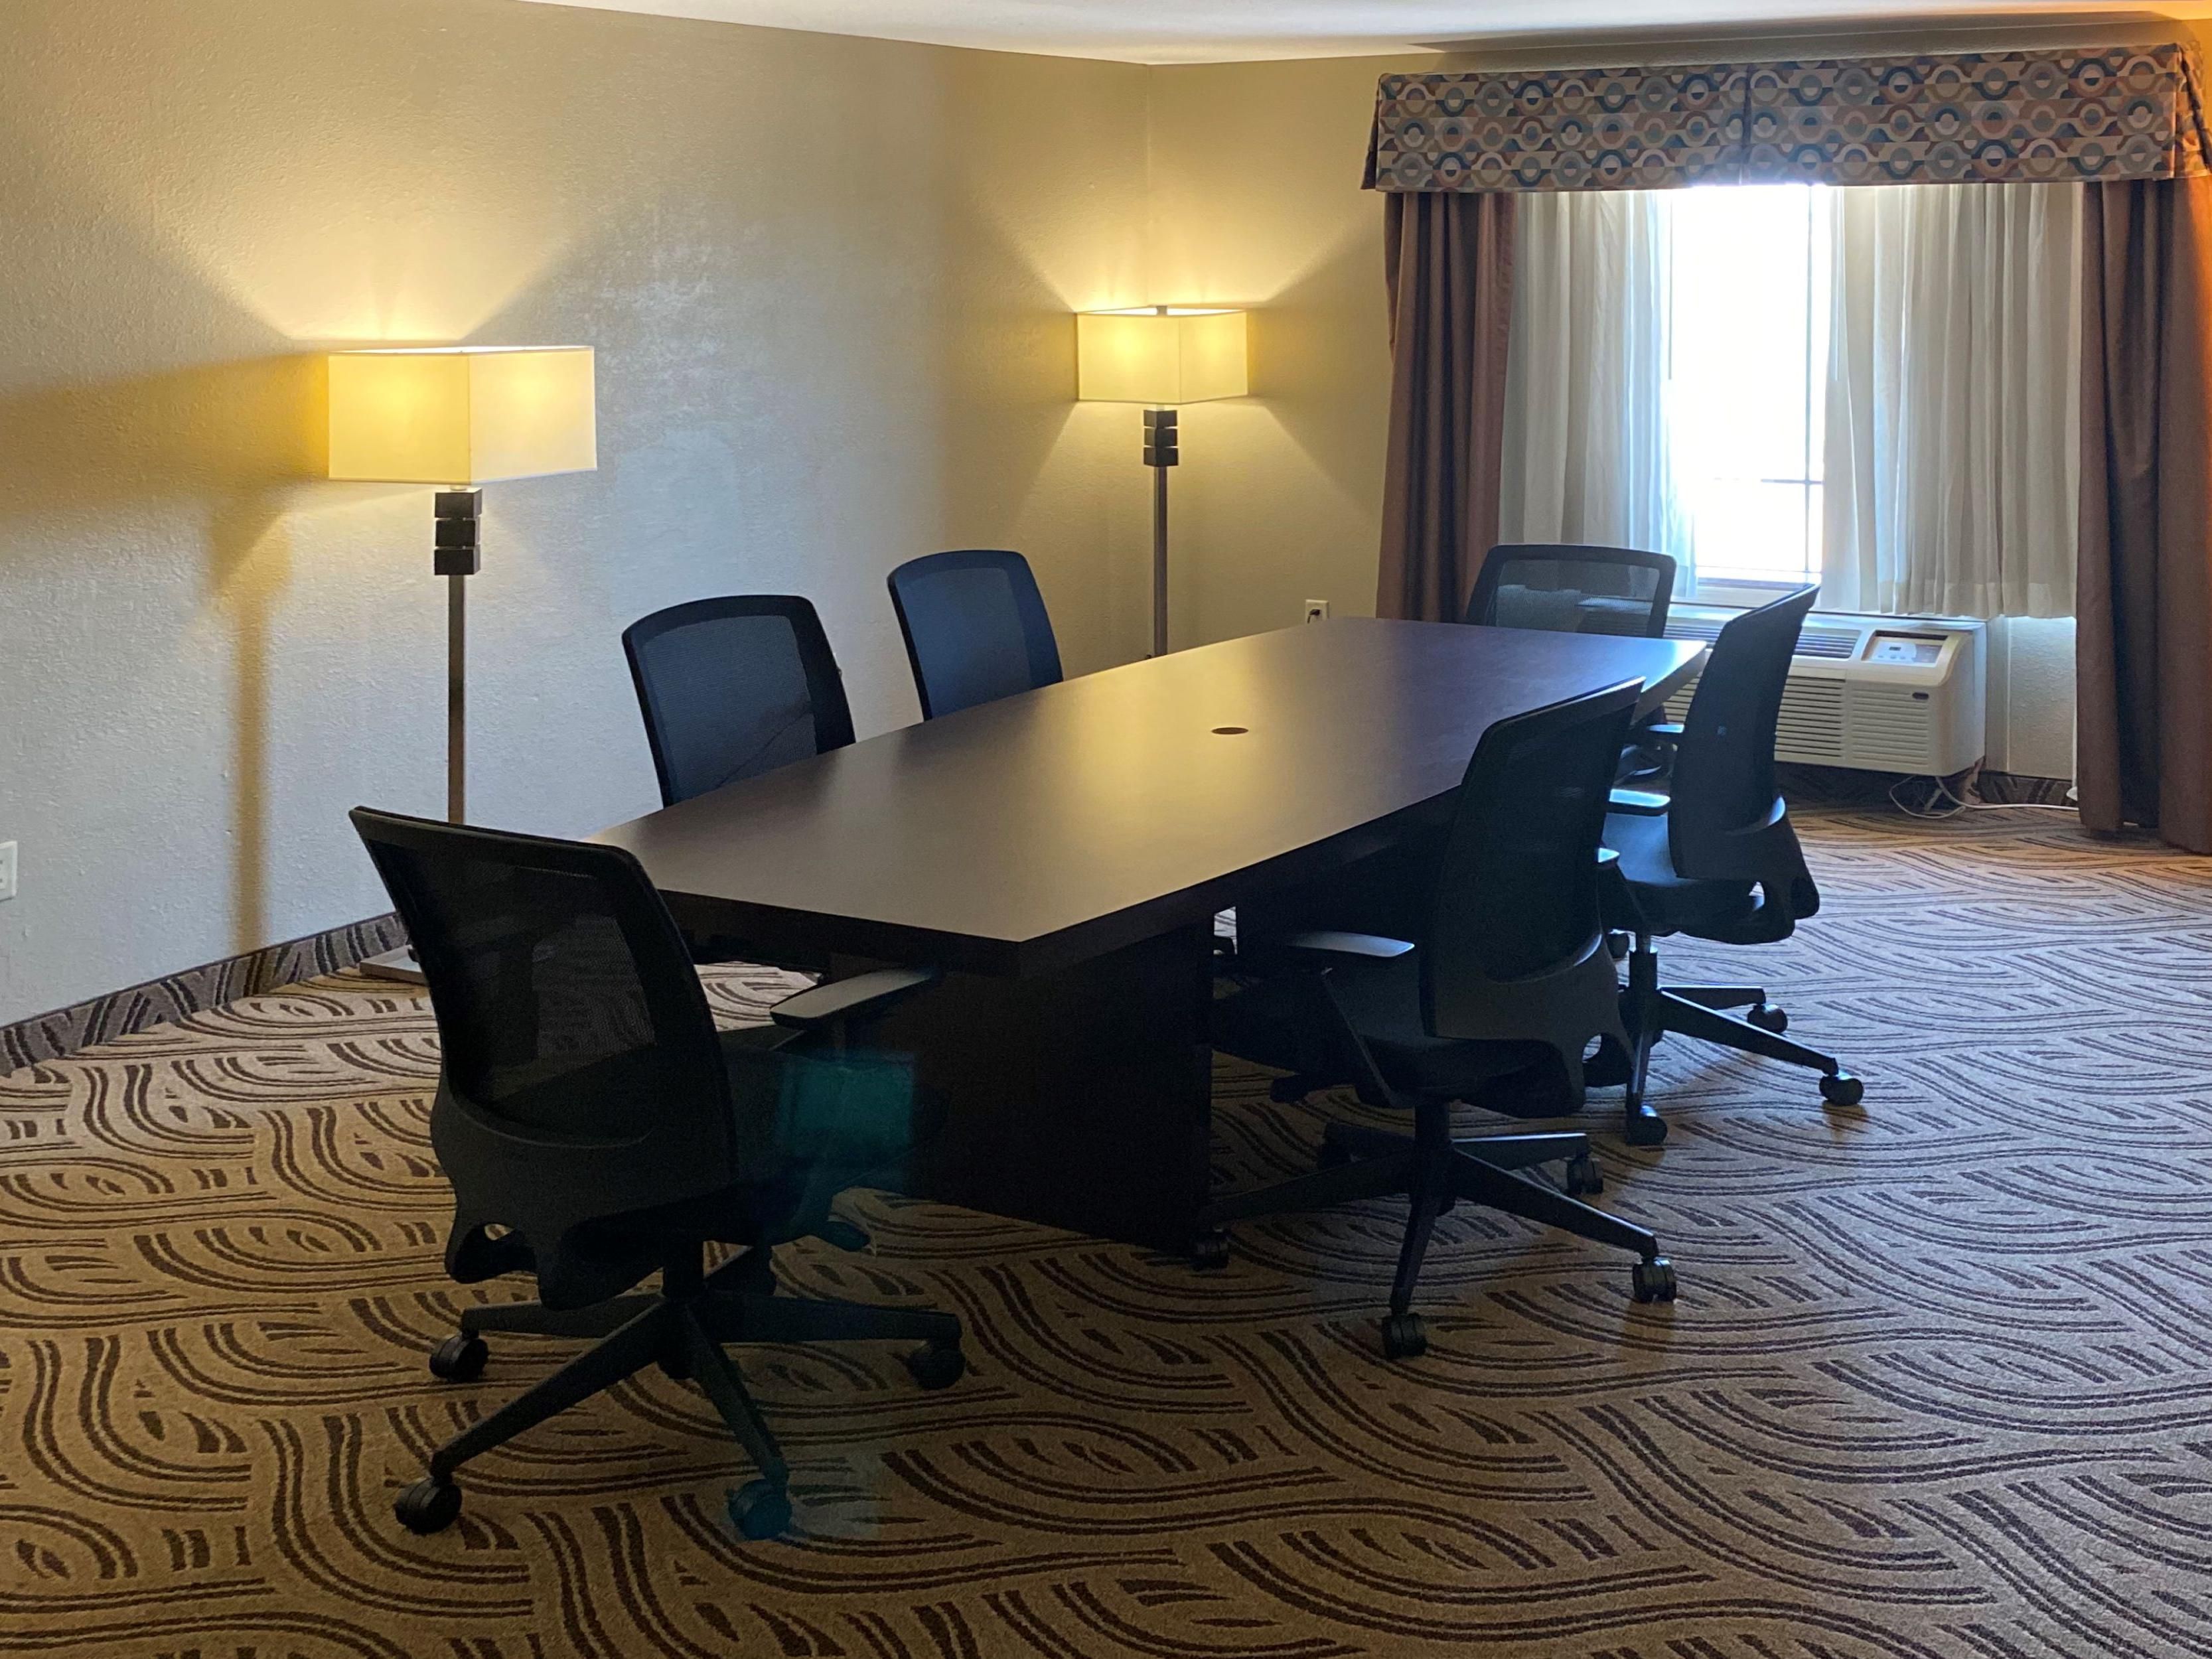 In the need for a quick meeting? Stop by and reserve one of our spacious boardroom suites. 